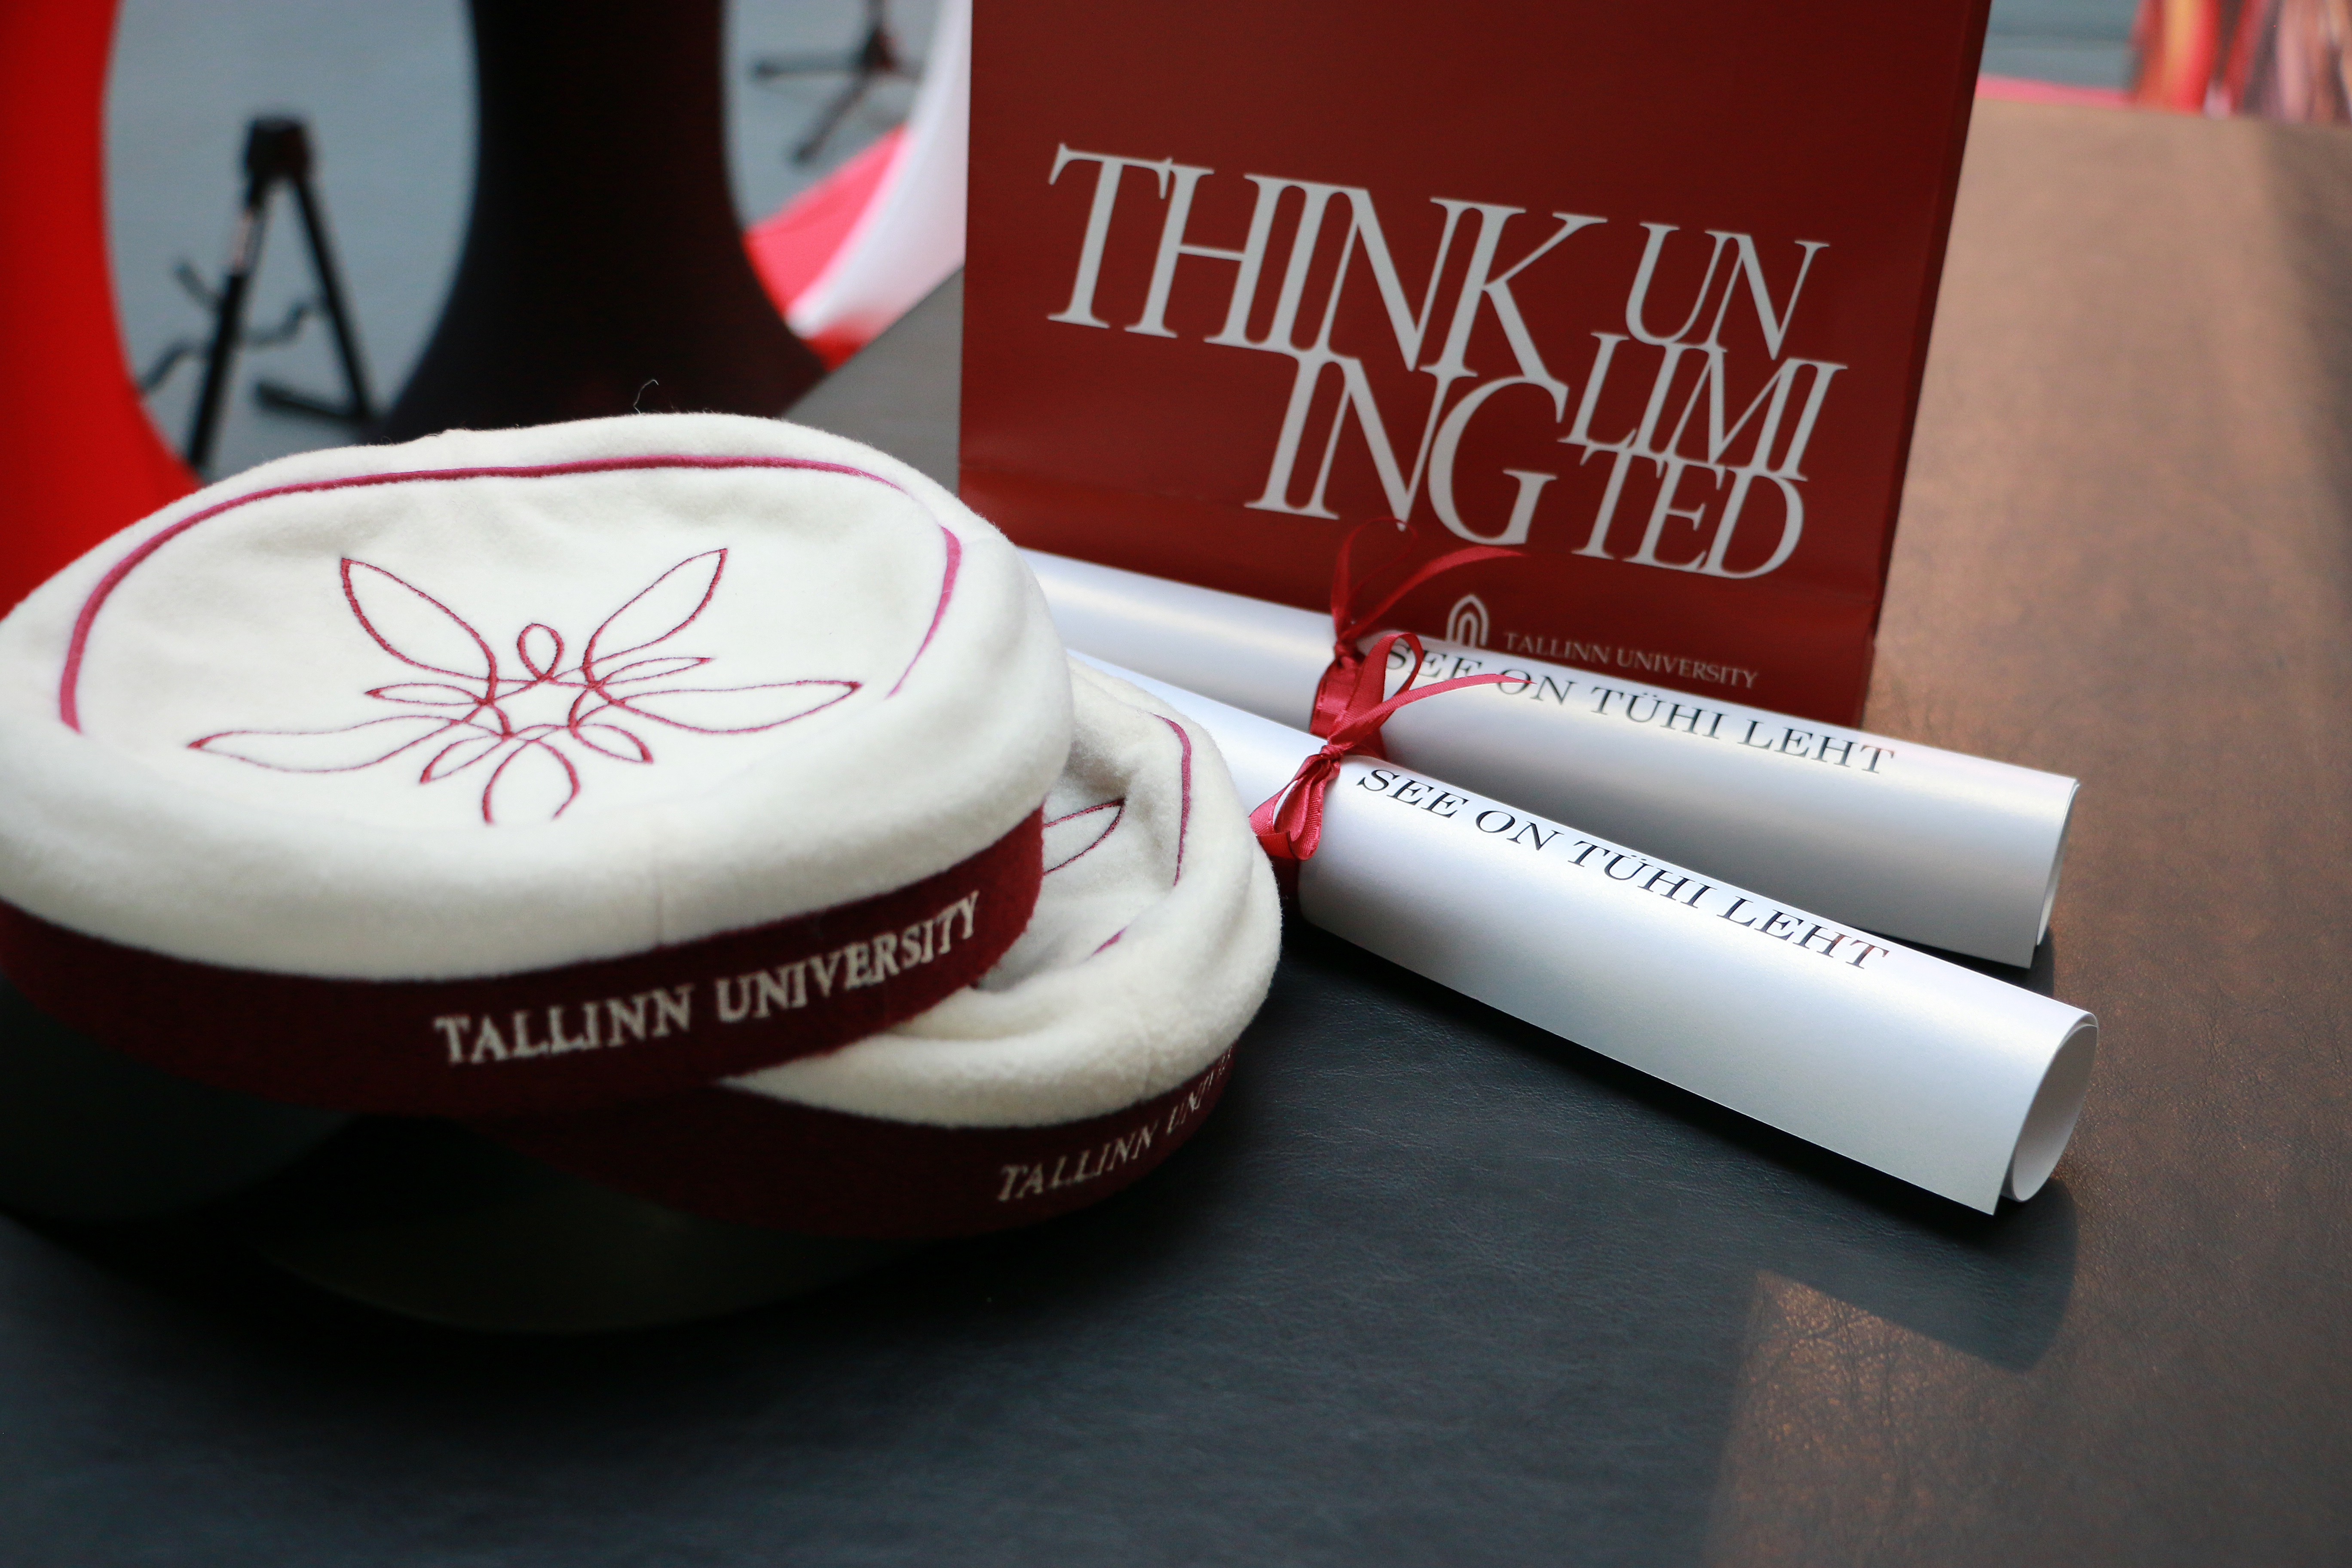 Tallinn University hats and a sign reading Thinking Unlimited